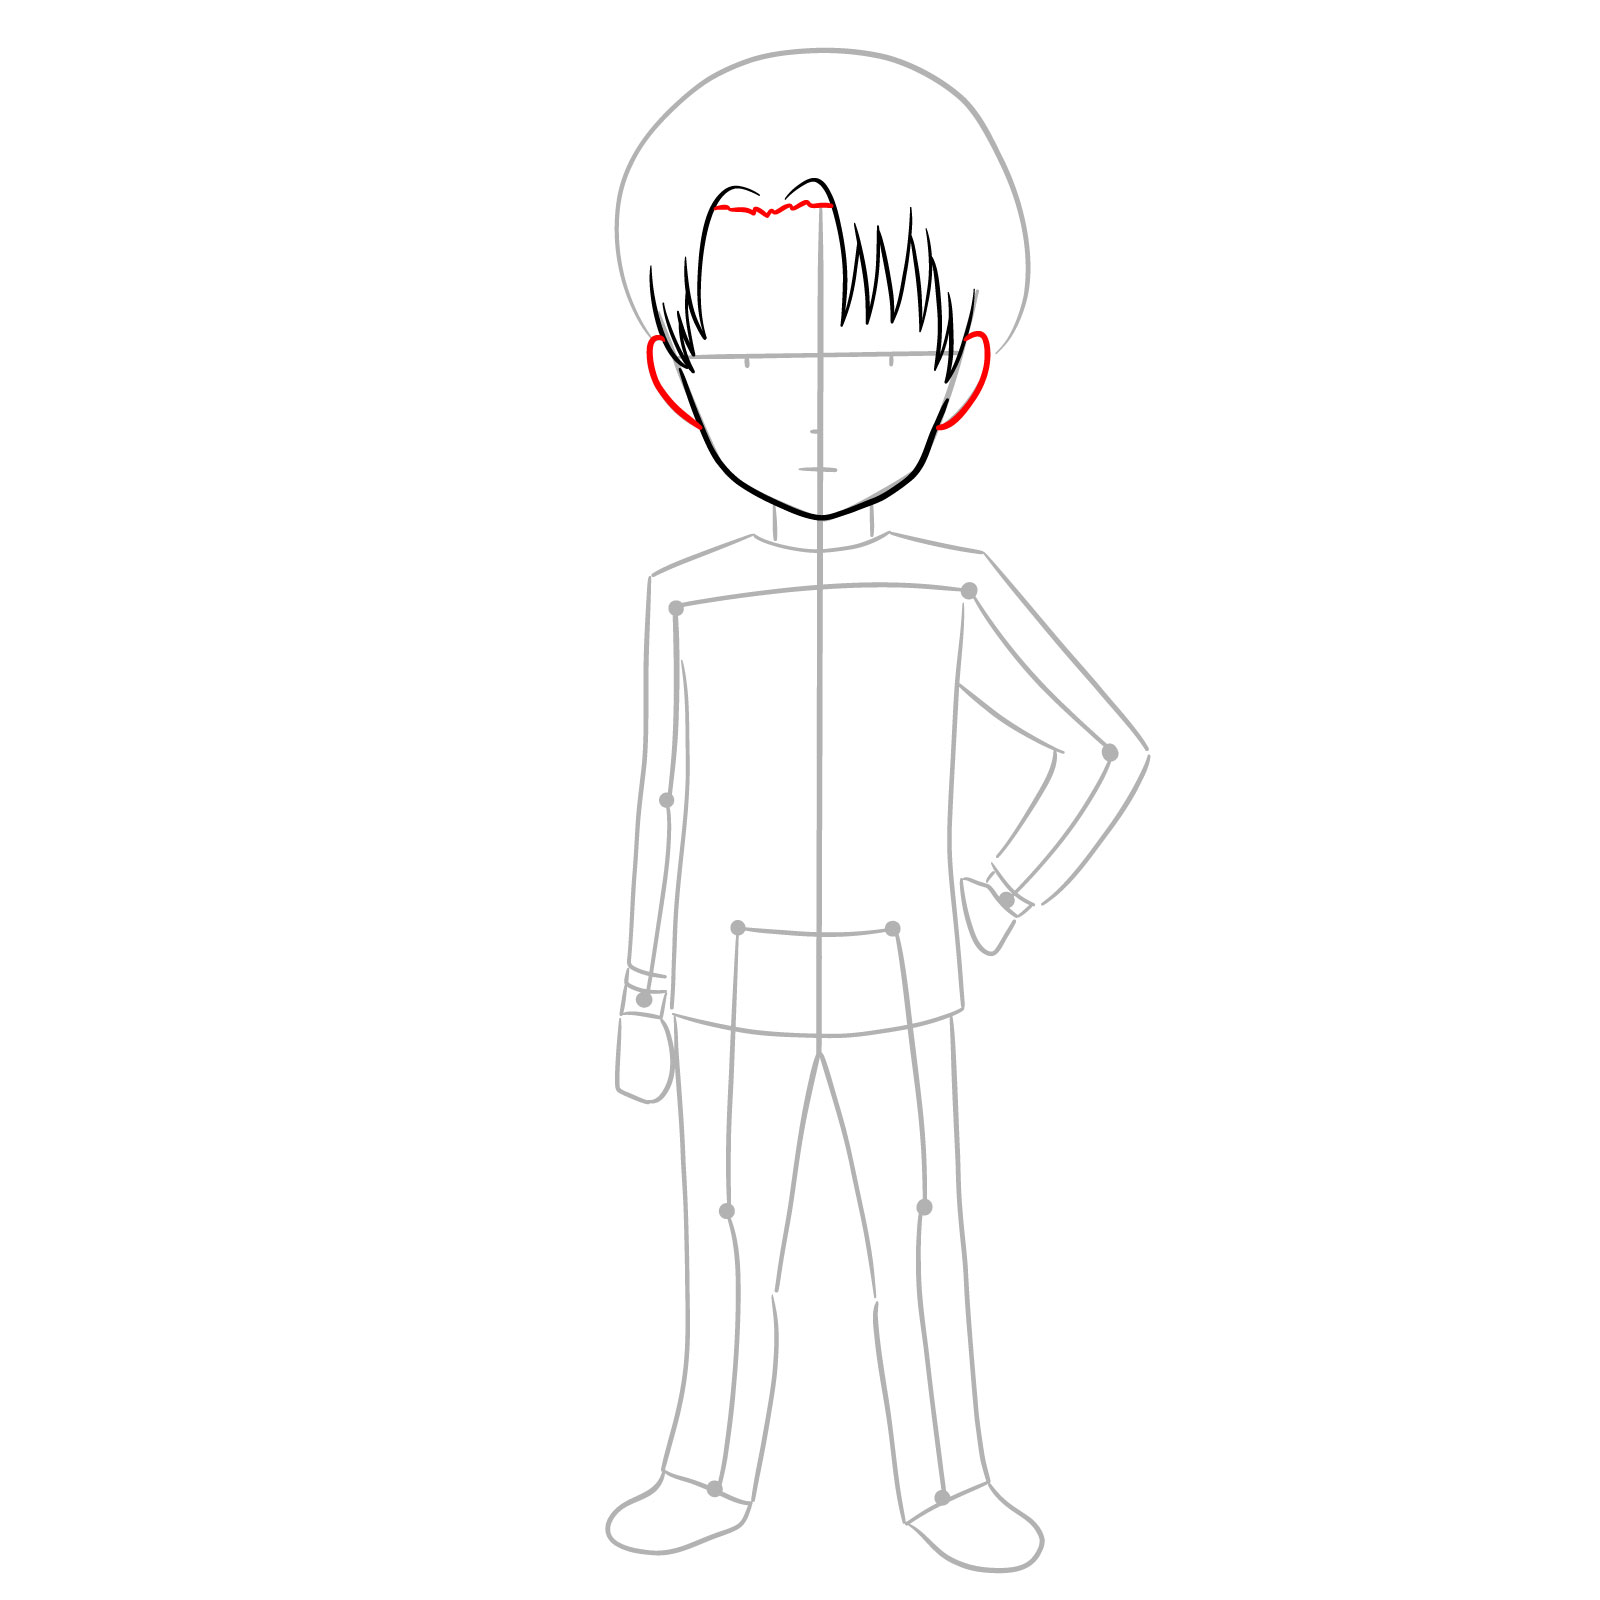 Detailing ears and hairline for chibi Captain Levi drawing - step 05